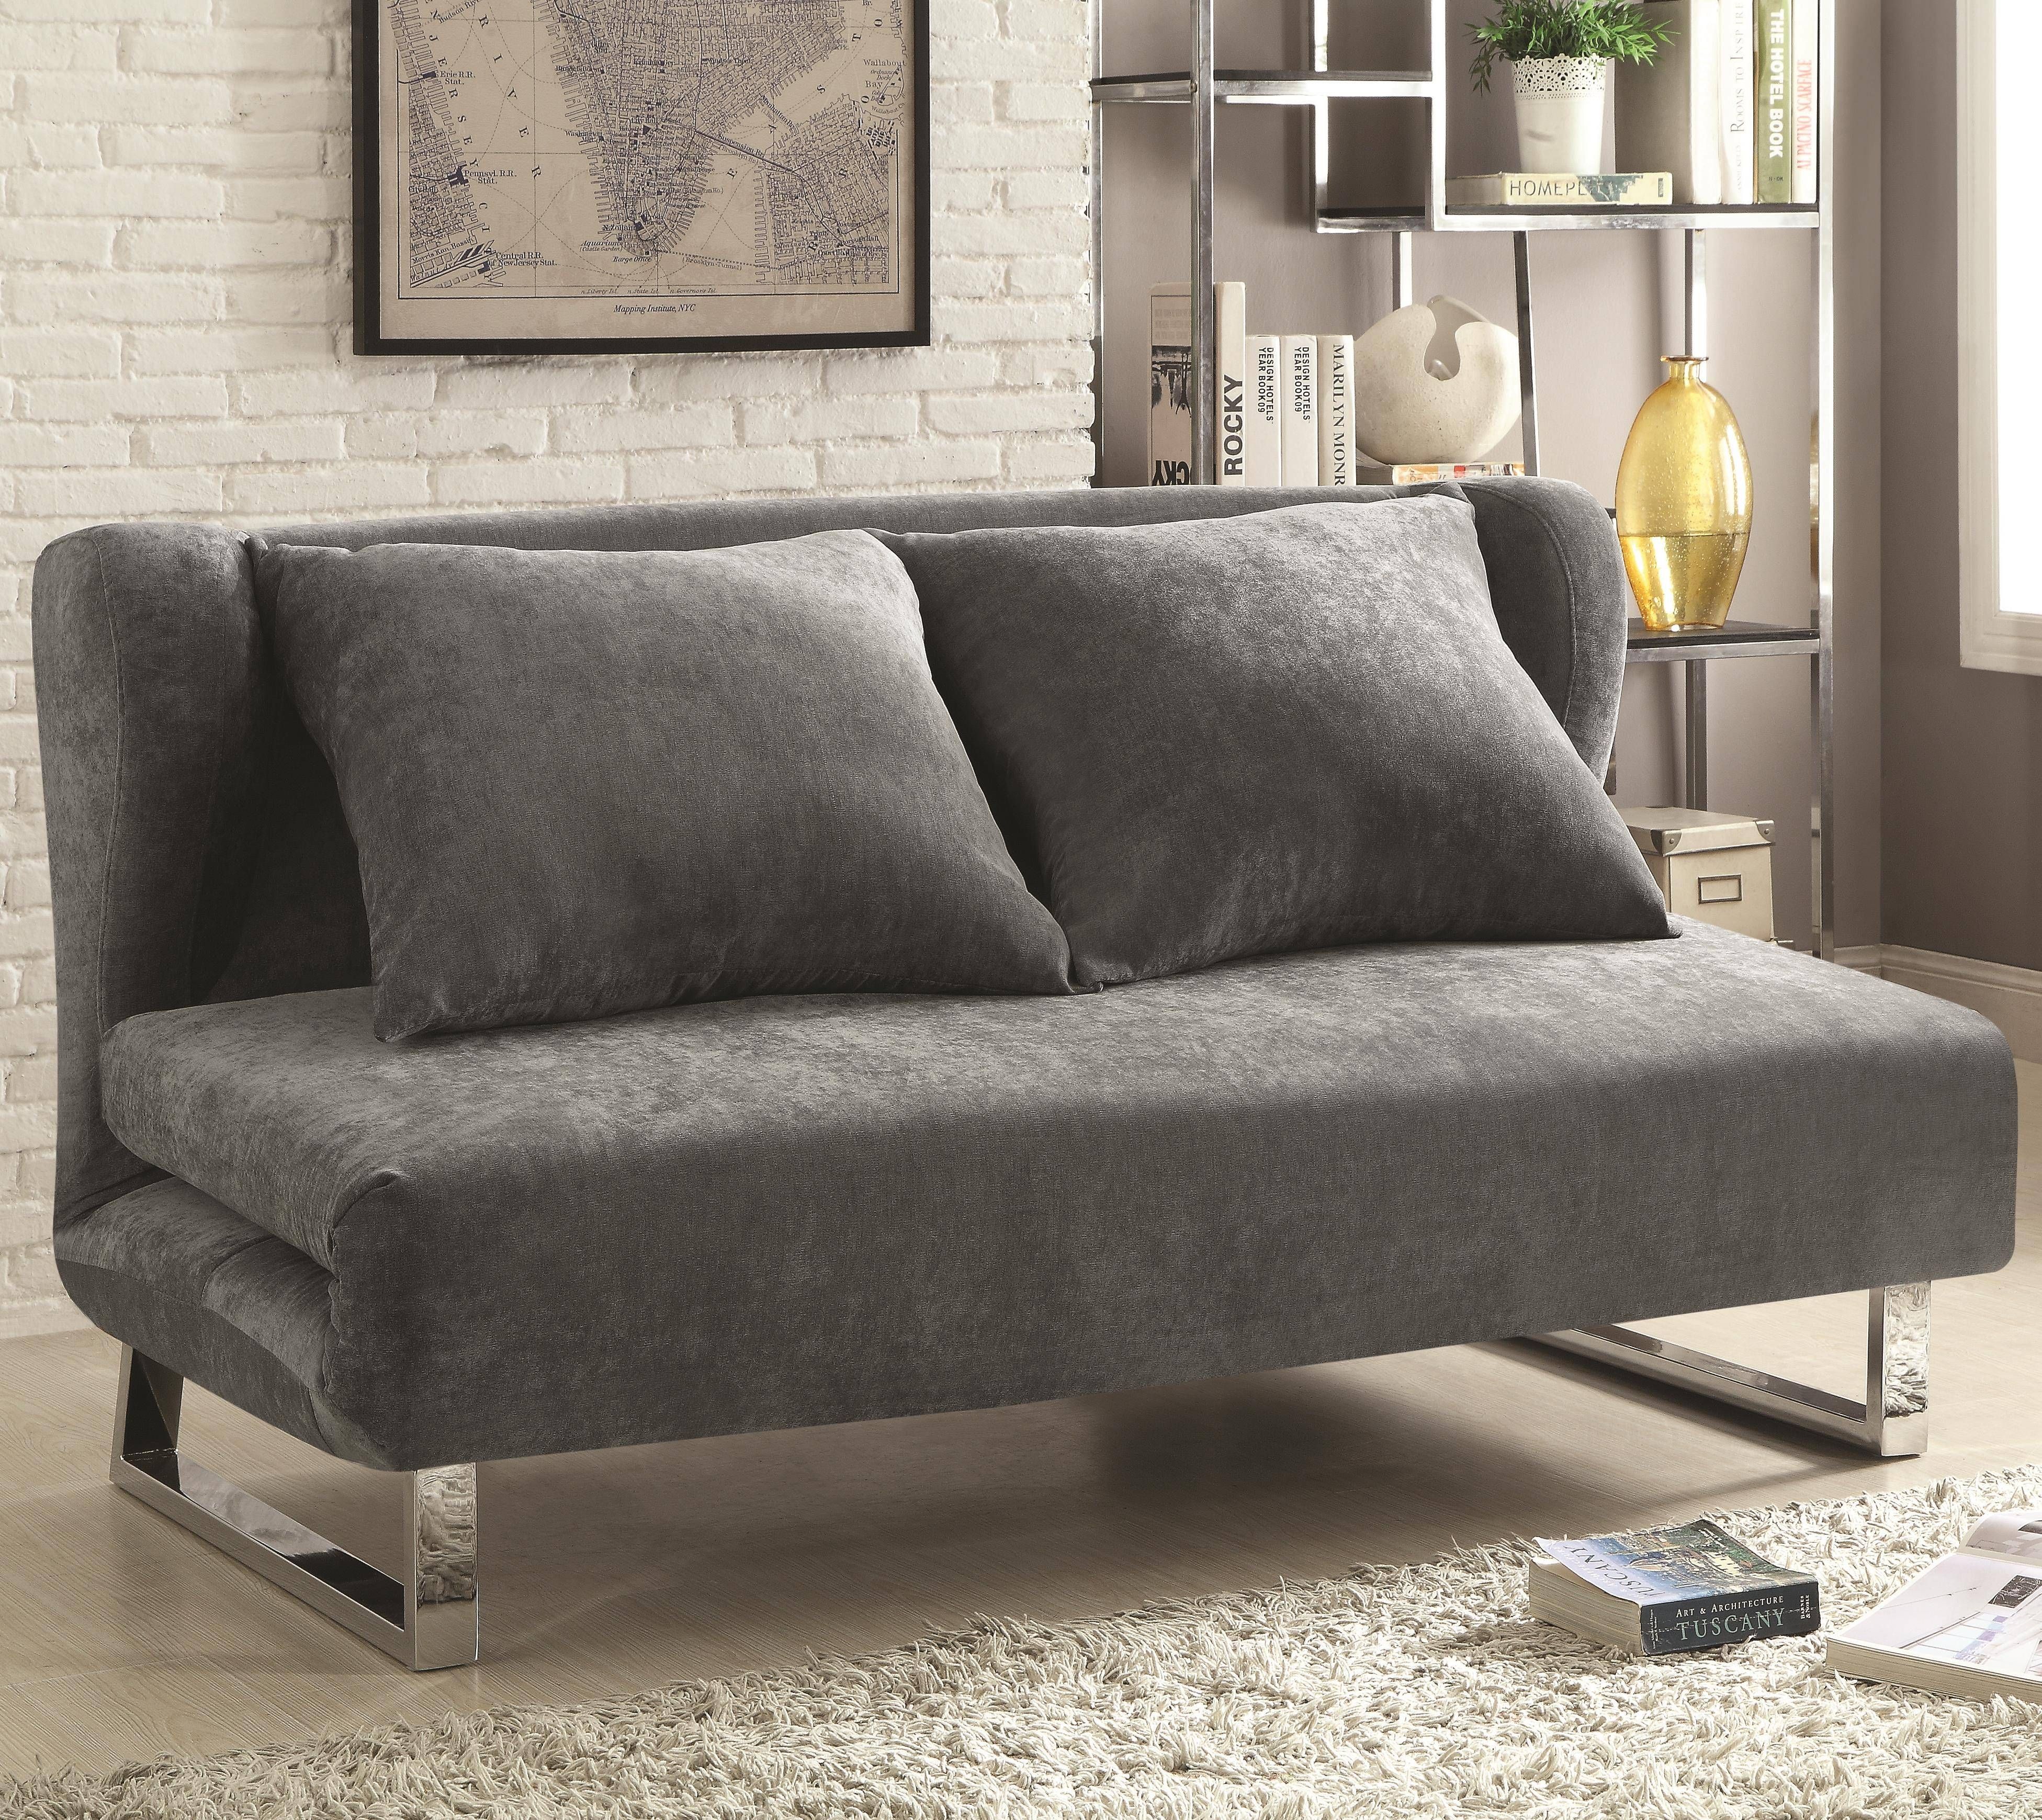 Coaster Sofa Beds And Futons Transitional Velvet Sofa Bed – Prime Pertaining To Coaster Futon Sofa Beds (View 7 of 15)